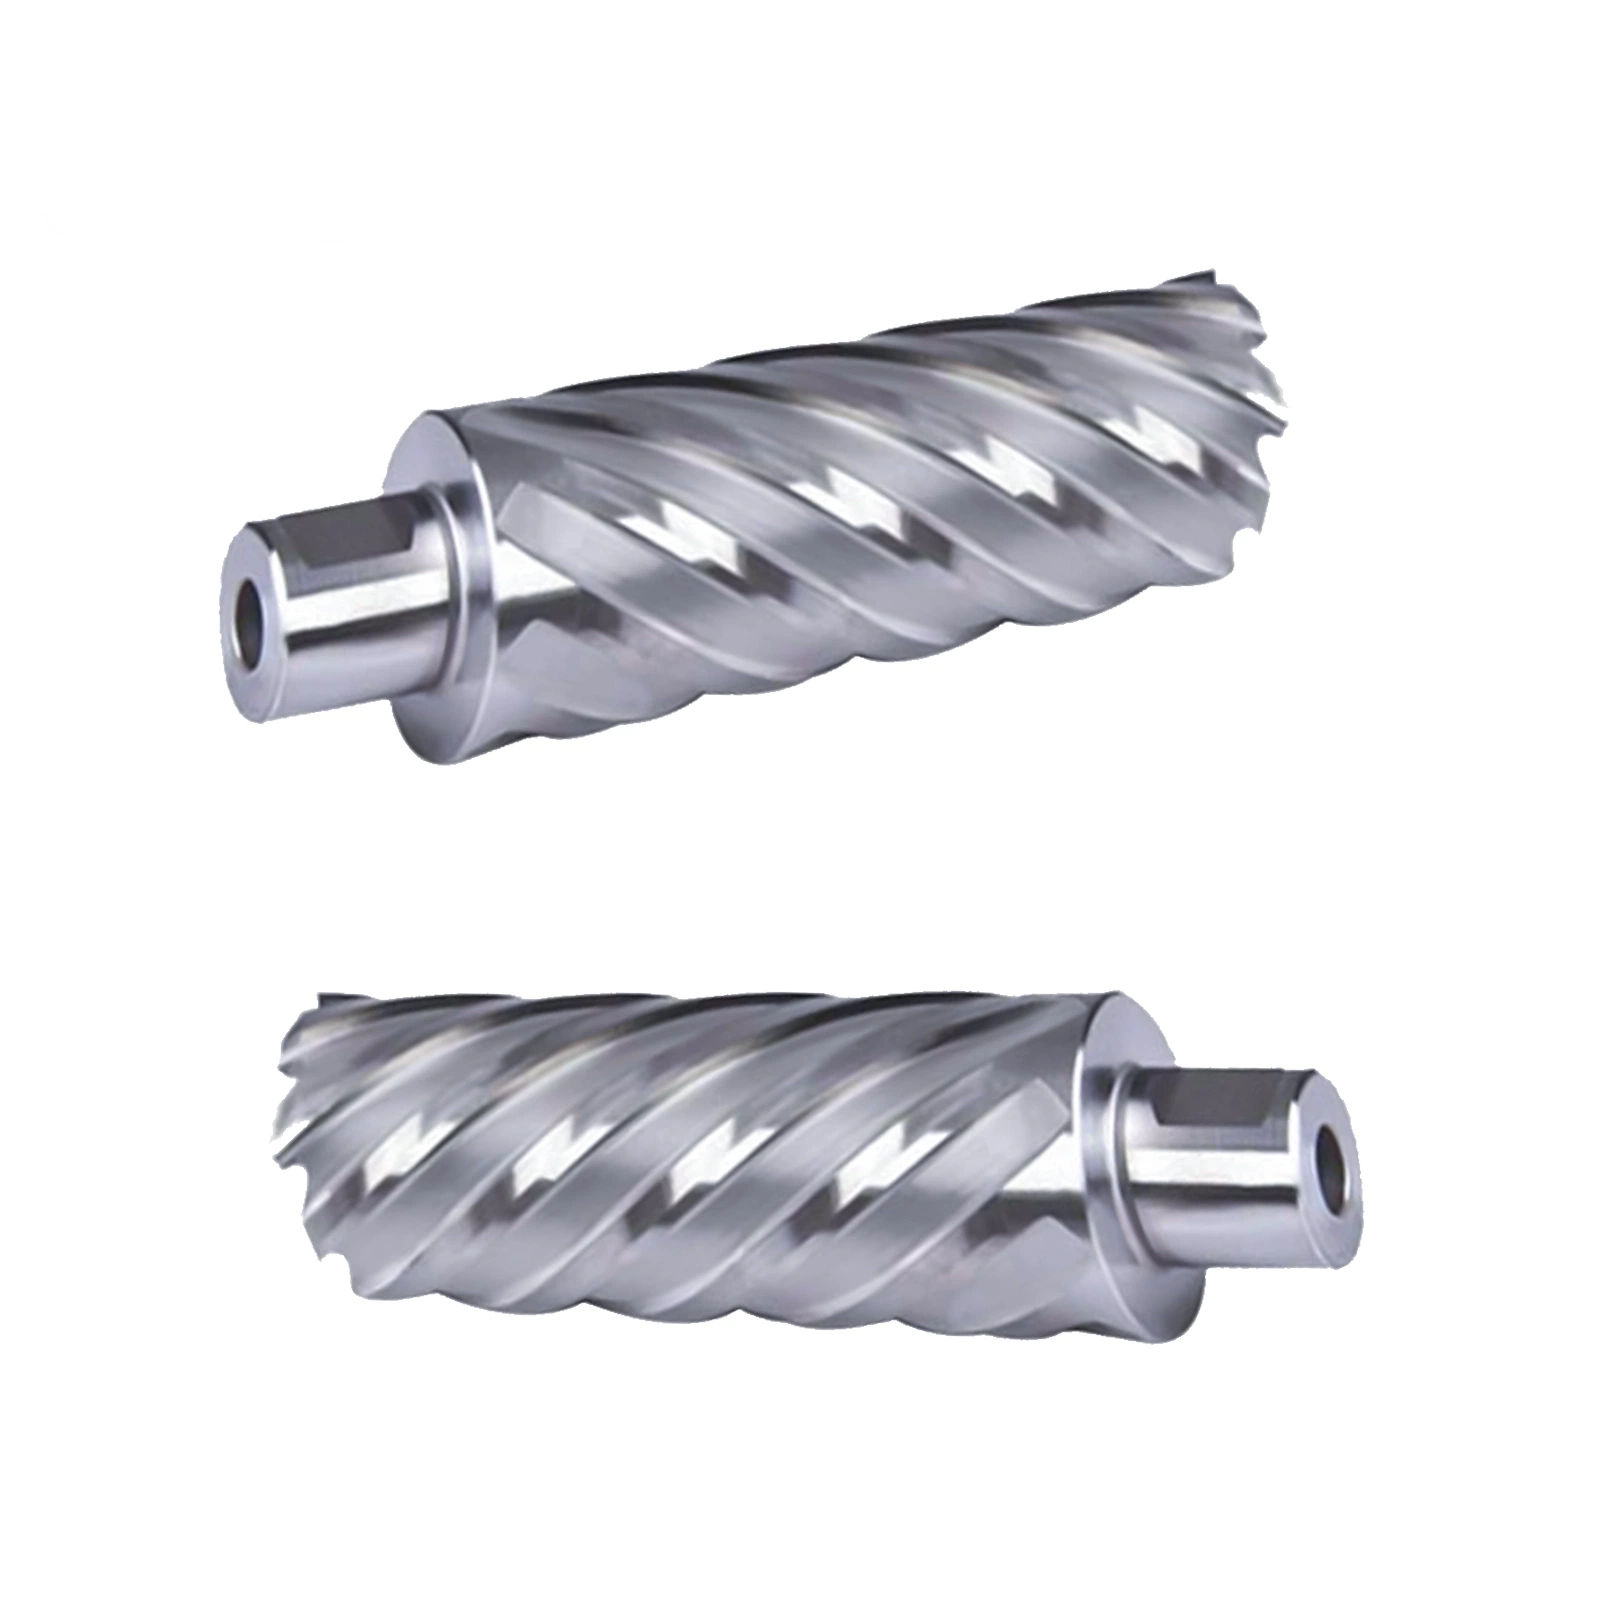 Ej 12-52mm*50mm Tct Annular Cutter Magnetic Hollow Core Drill Bits Hard Alloy Hole Saw for Iron Stainless Steel